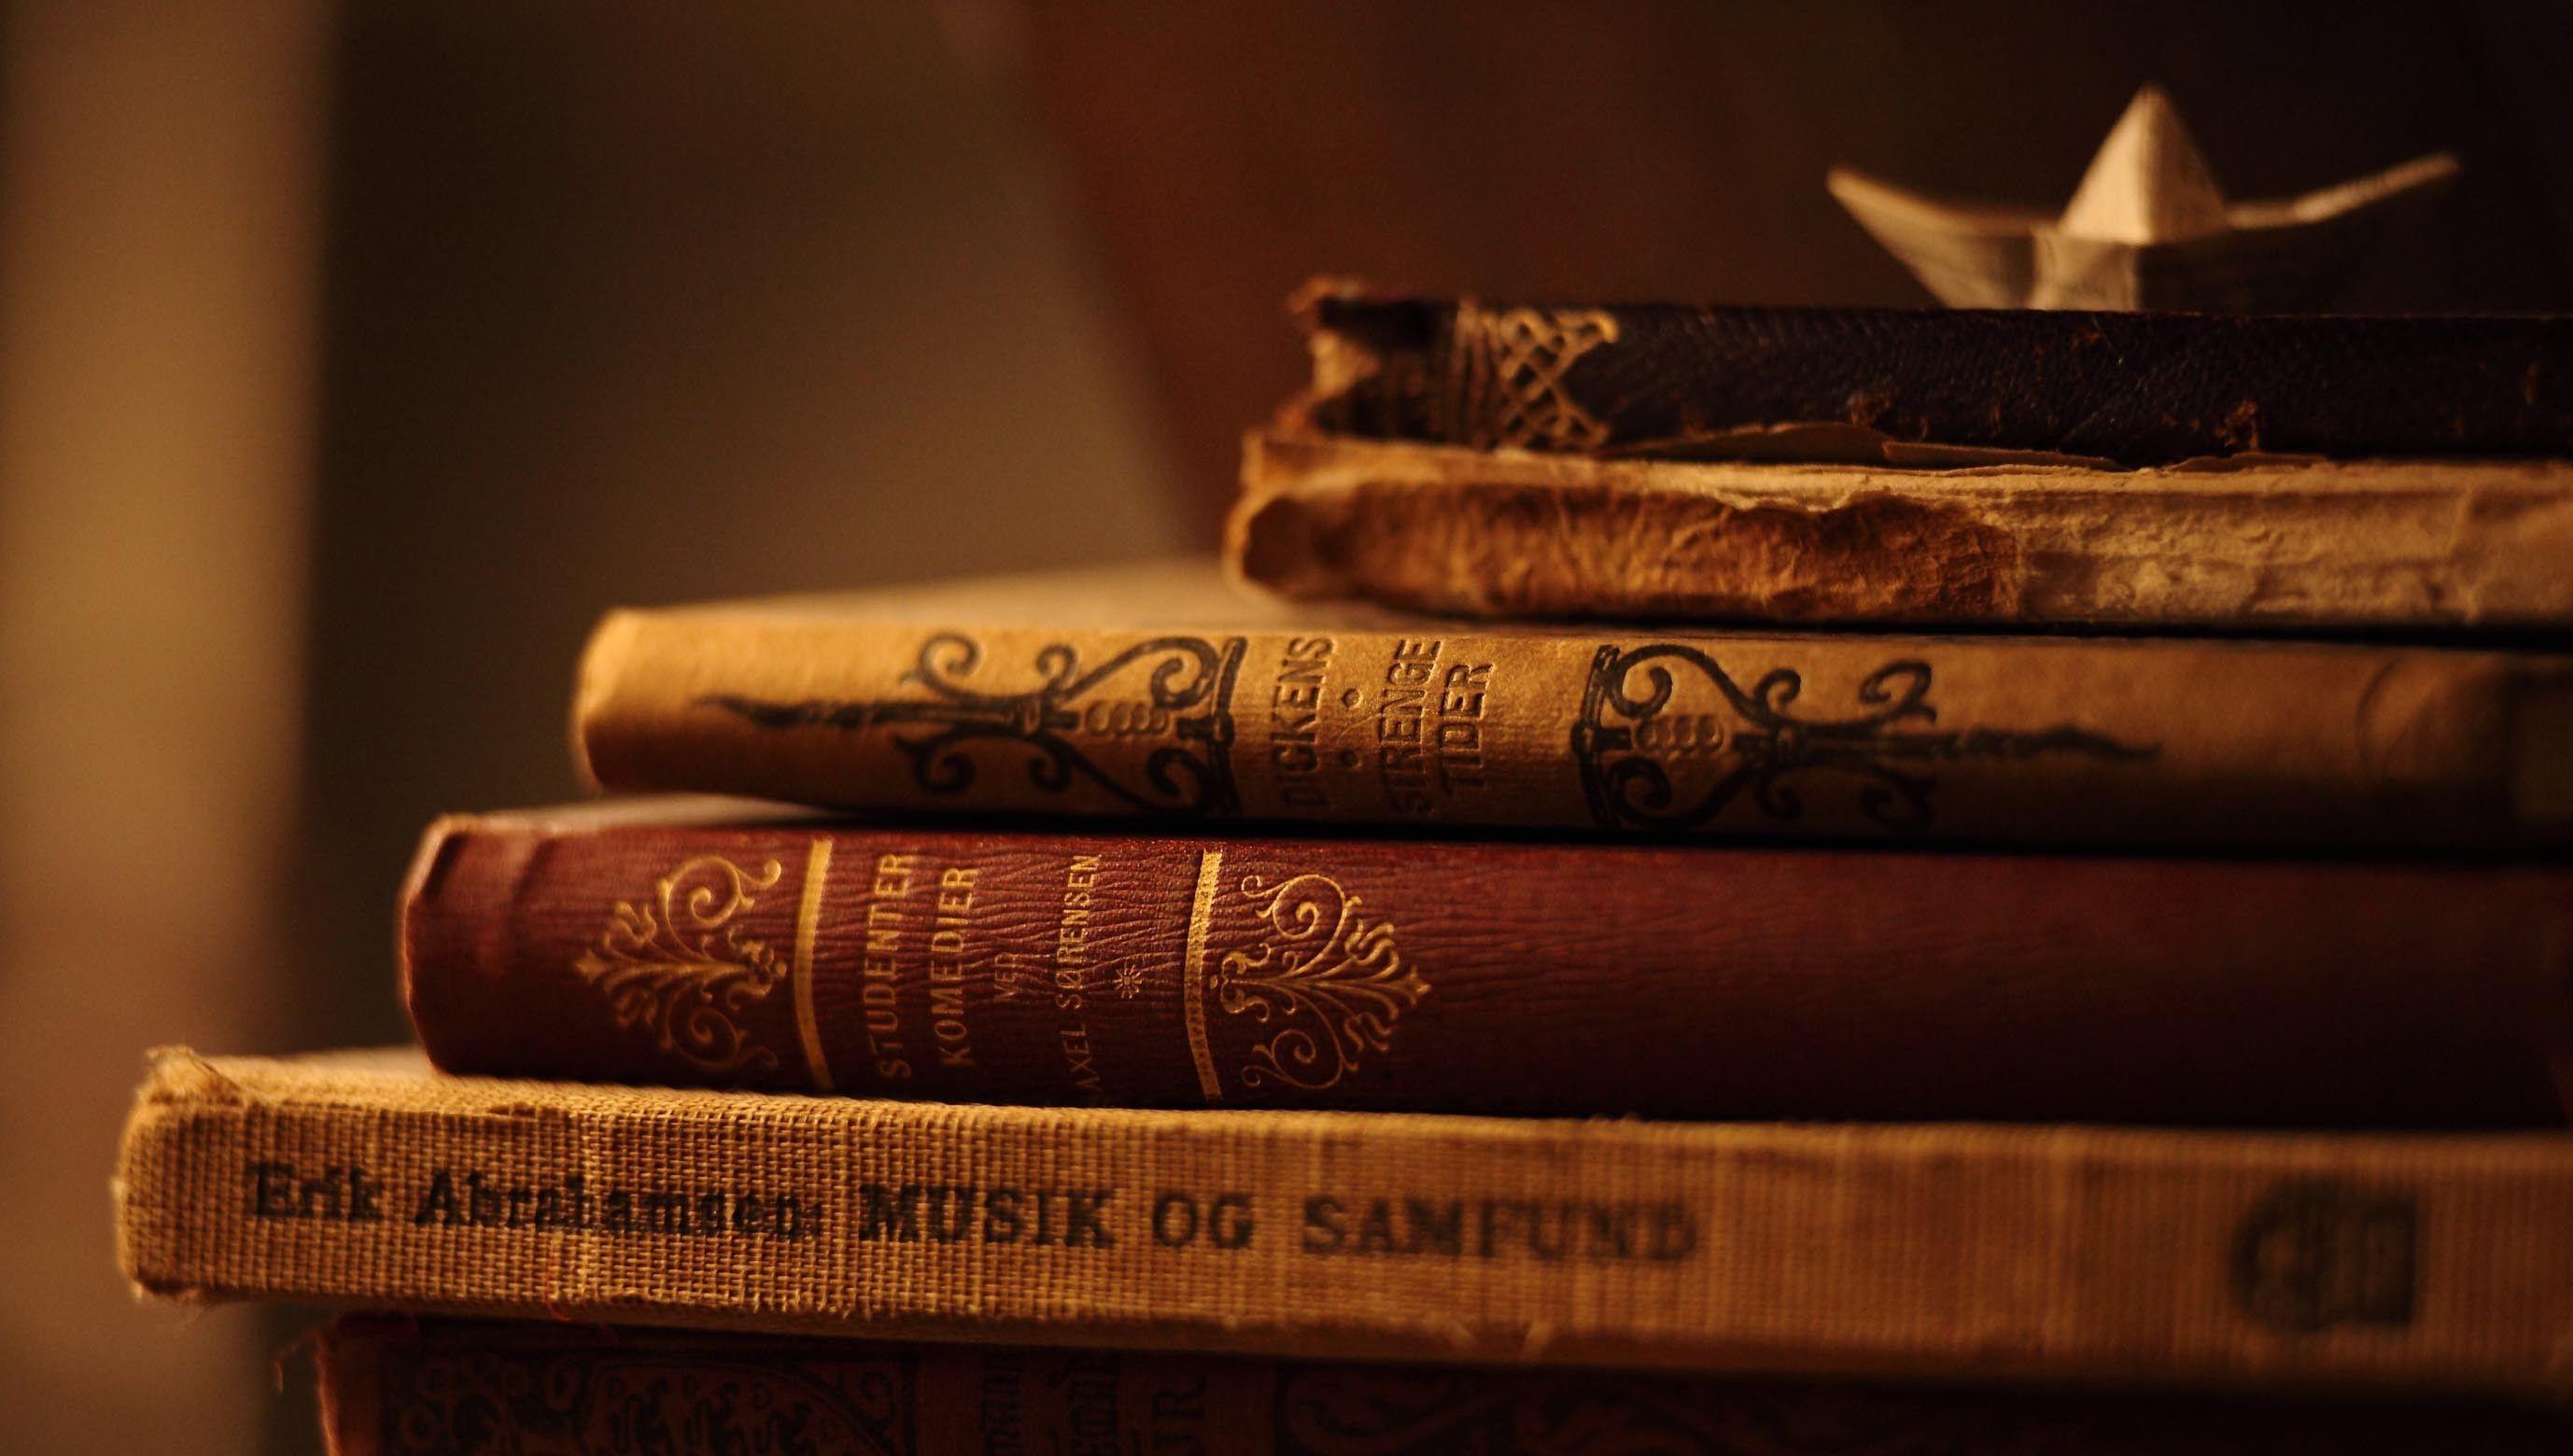 Vintage pocket watch and old books on a wooden office desk background.  Time, science concept photo – Wait Image on Unsplash